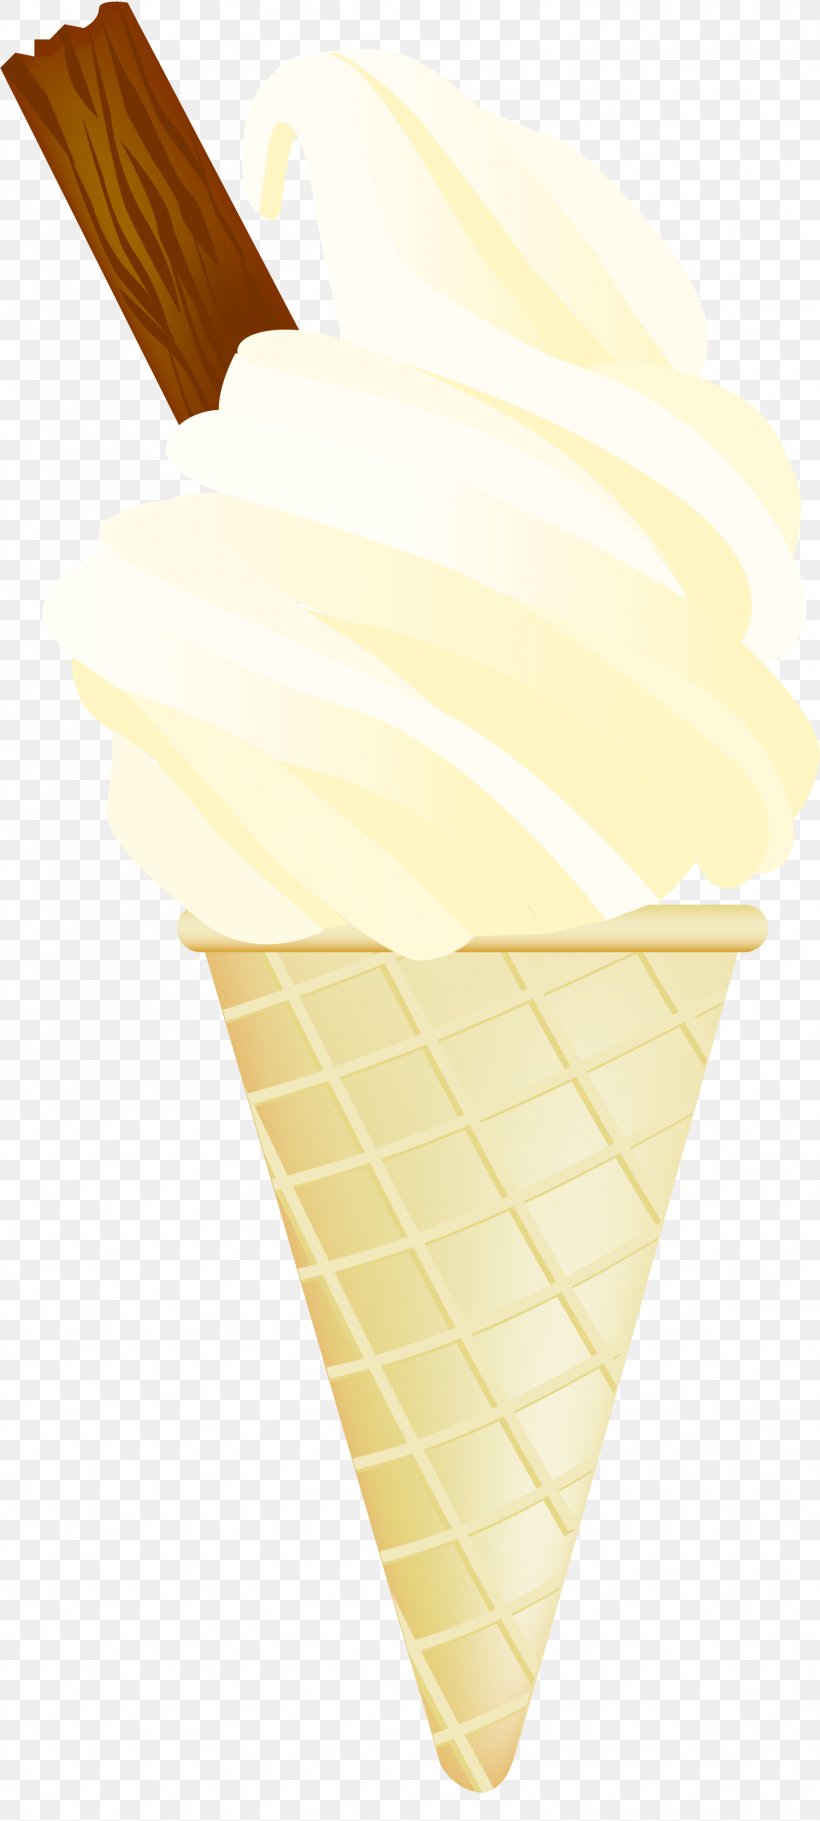 Ice Cream Cones 99 Flake Illustration, PNG, 1501x3335px, 99 Flake, Ice Cream, Dairy Product, Drawing, Flake Download Free